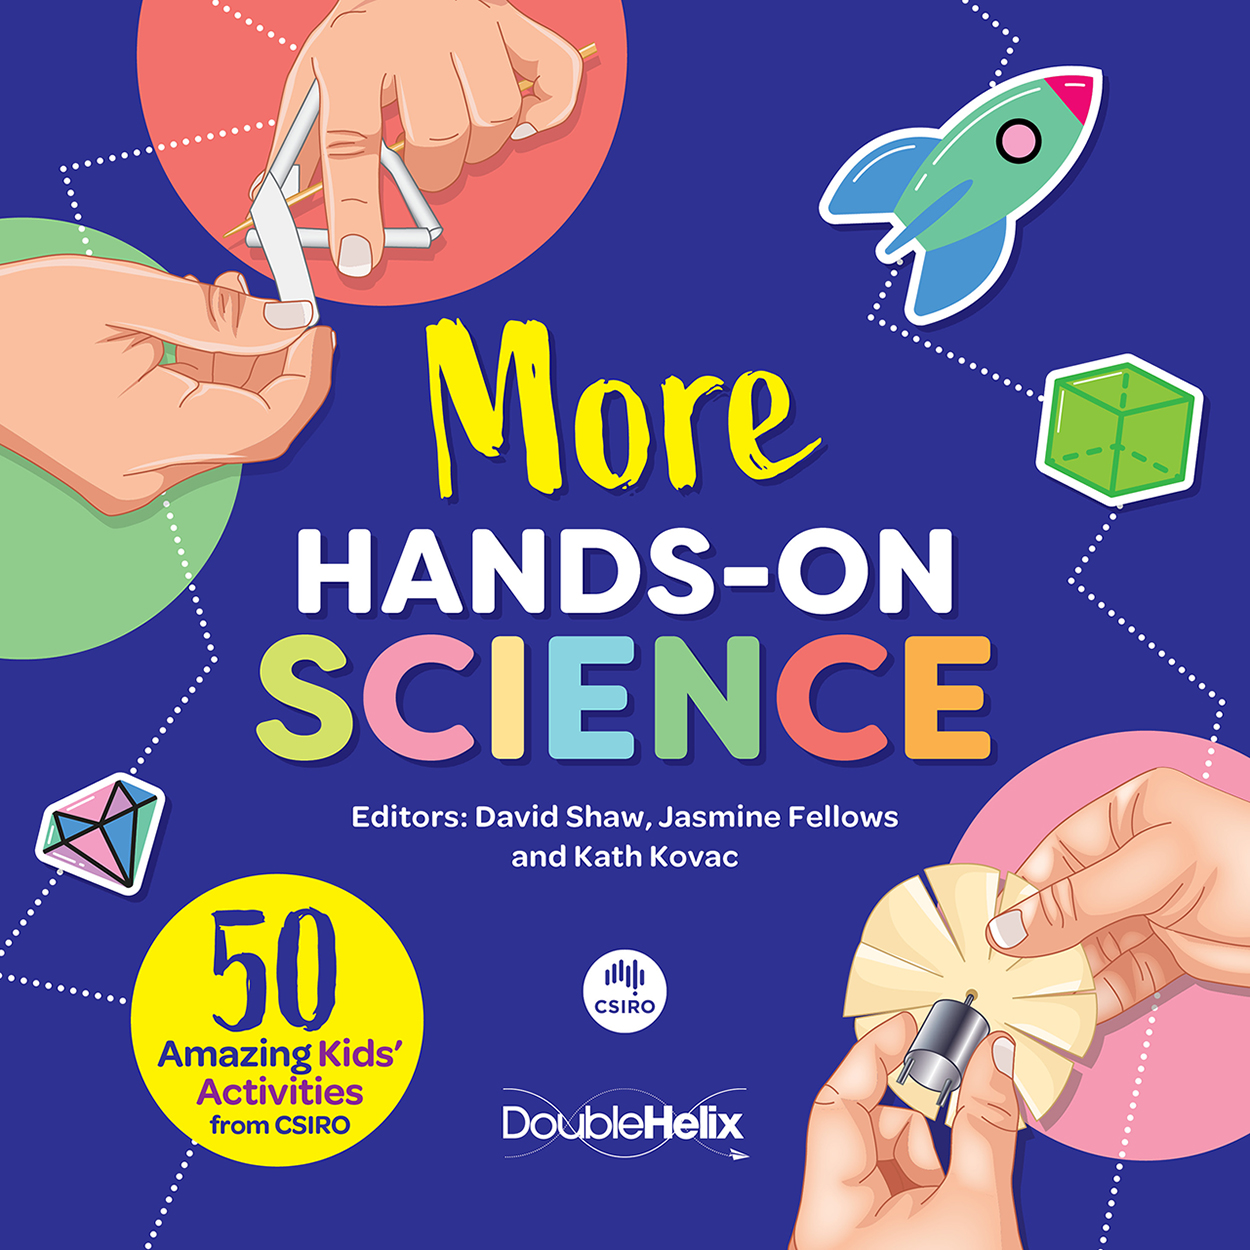 Cover of 'More Hands-On Science' featuring two sets of hands holding materials used for activities on a dark blue background.